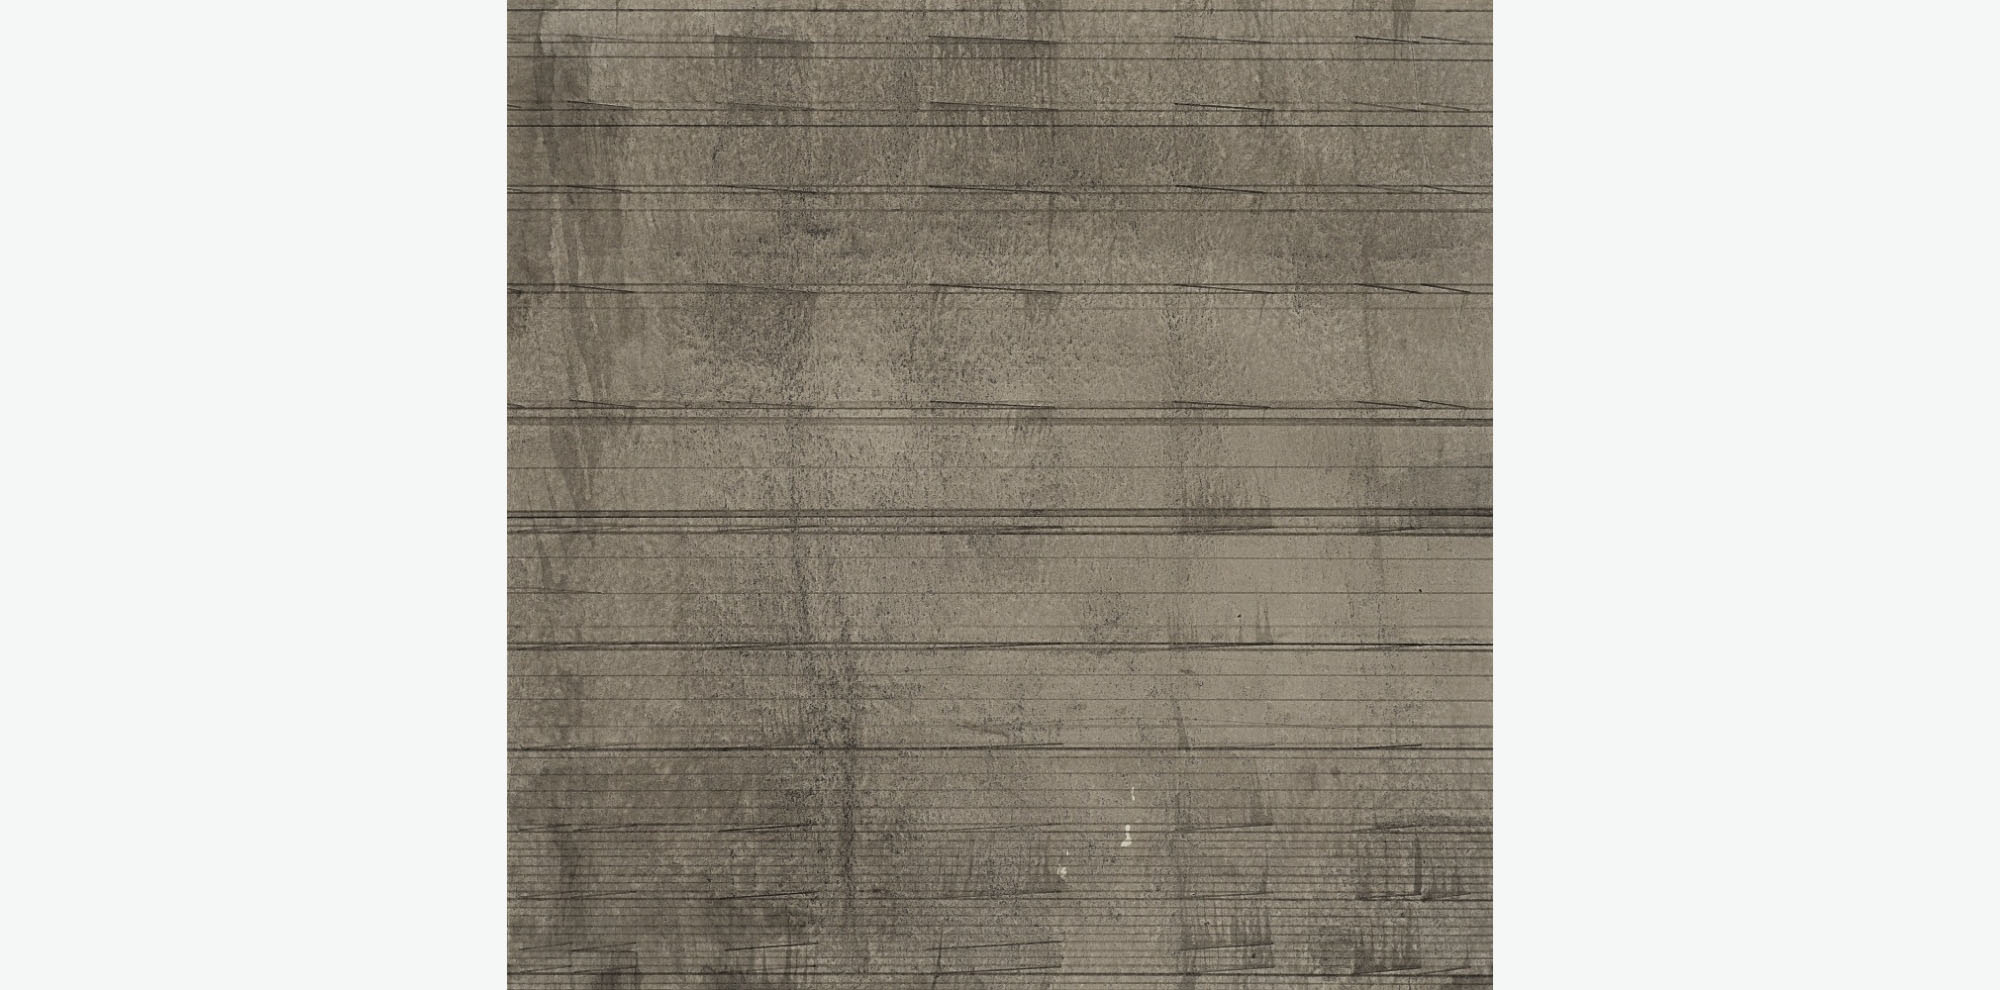 Multiple parallel lines spaced out at irregular intervals on an ink-washed tan paper.